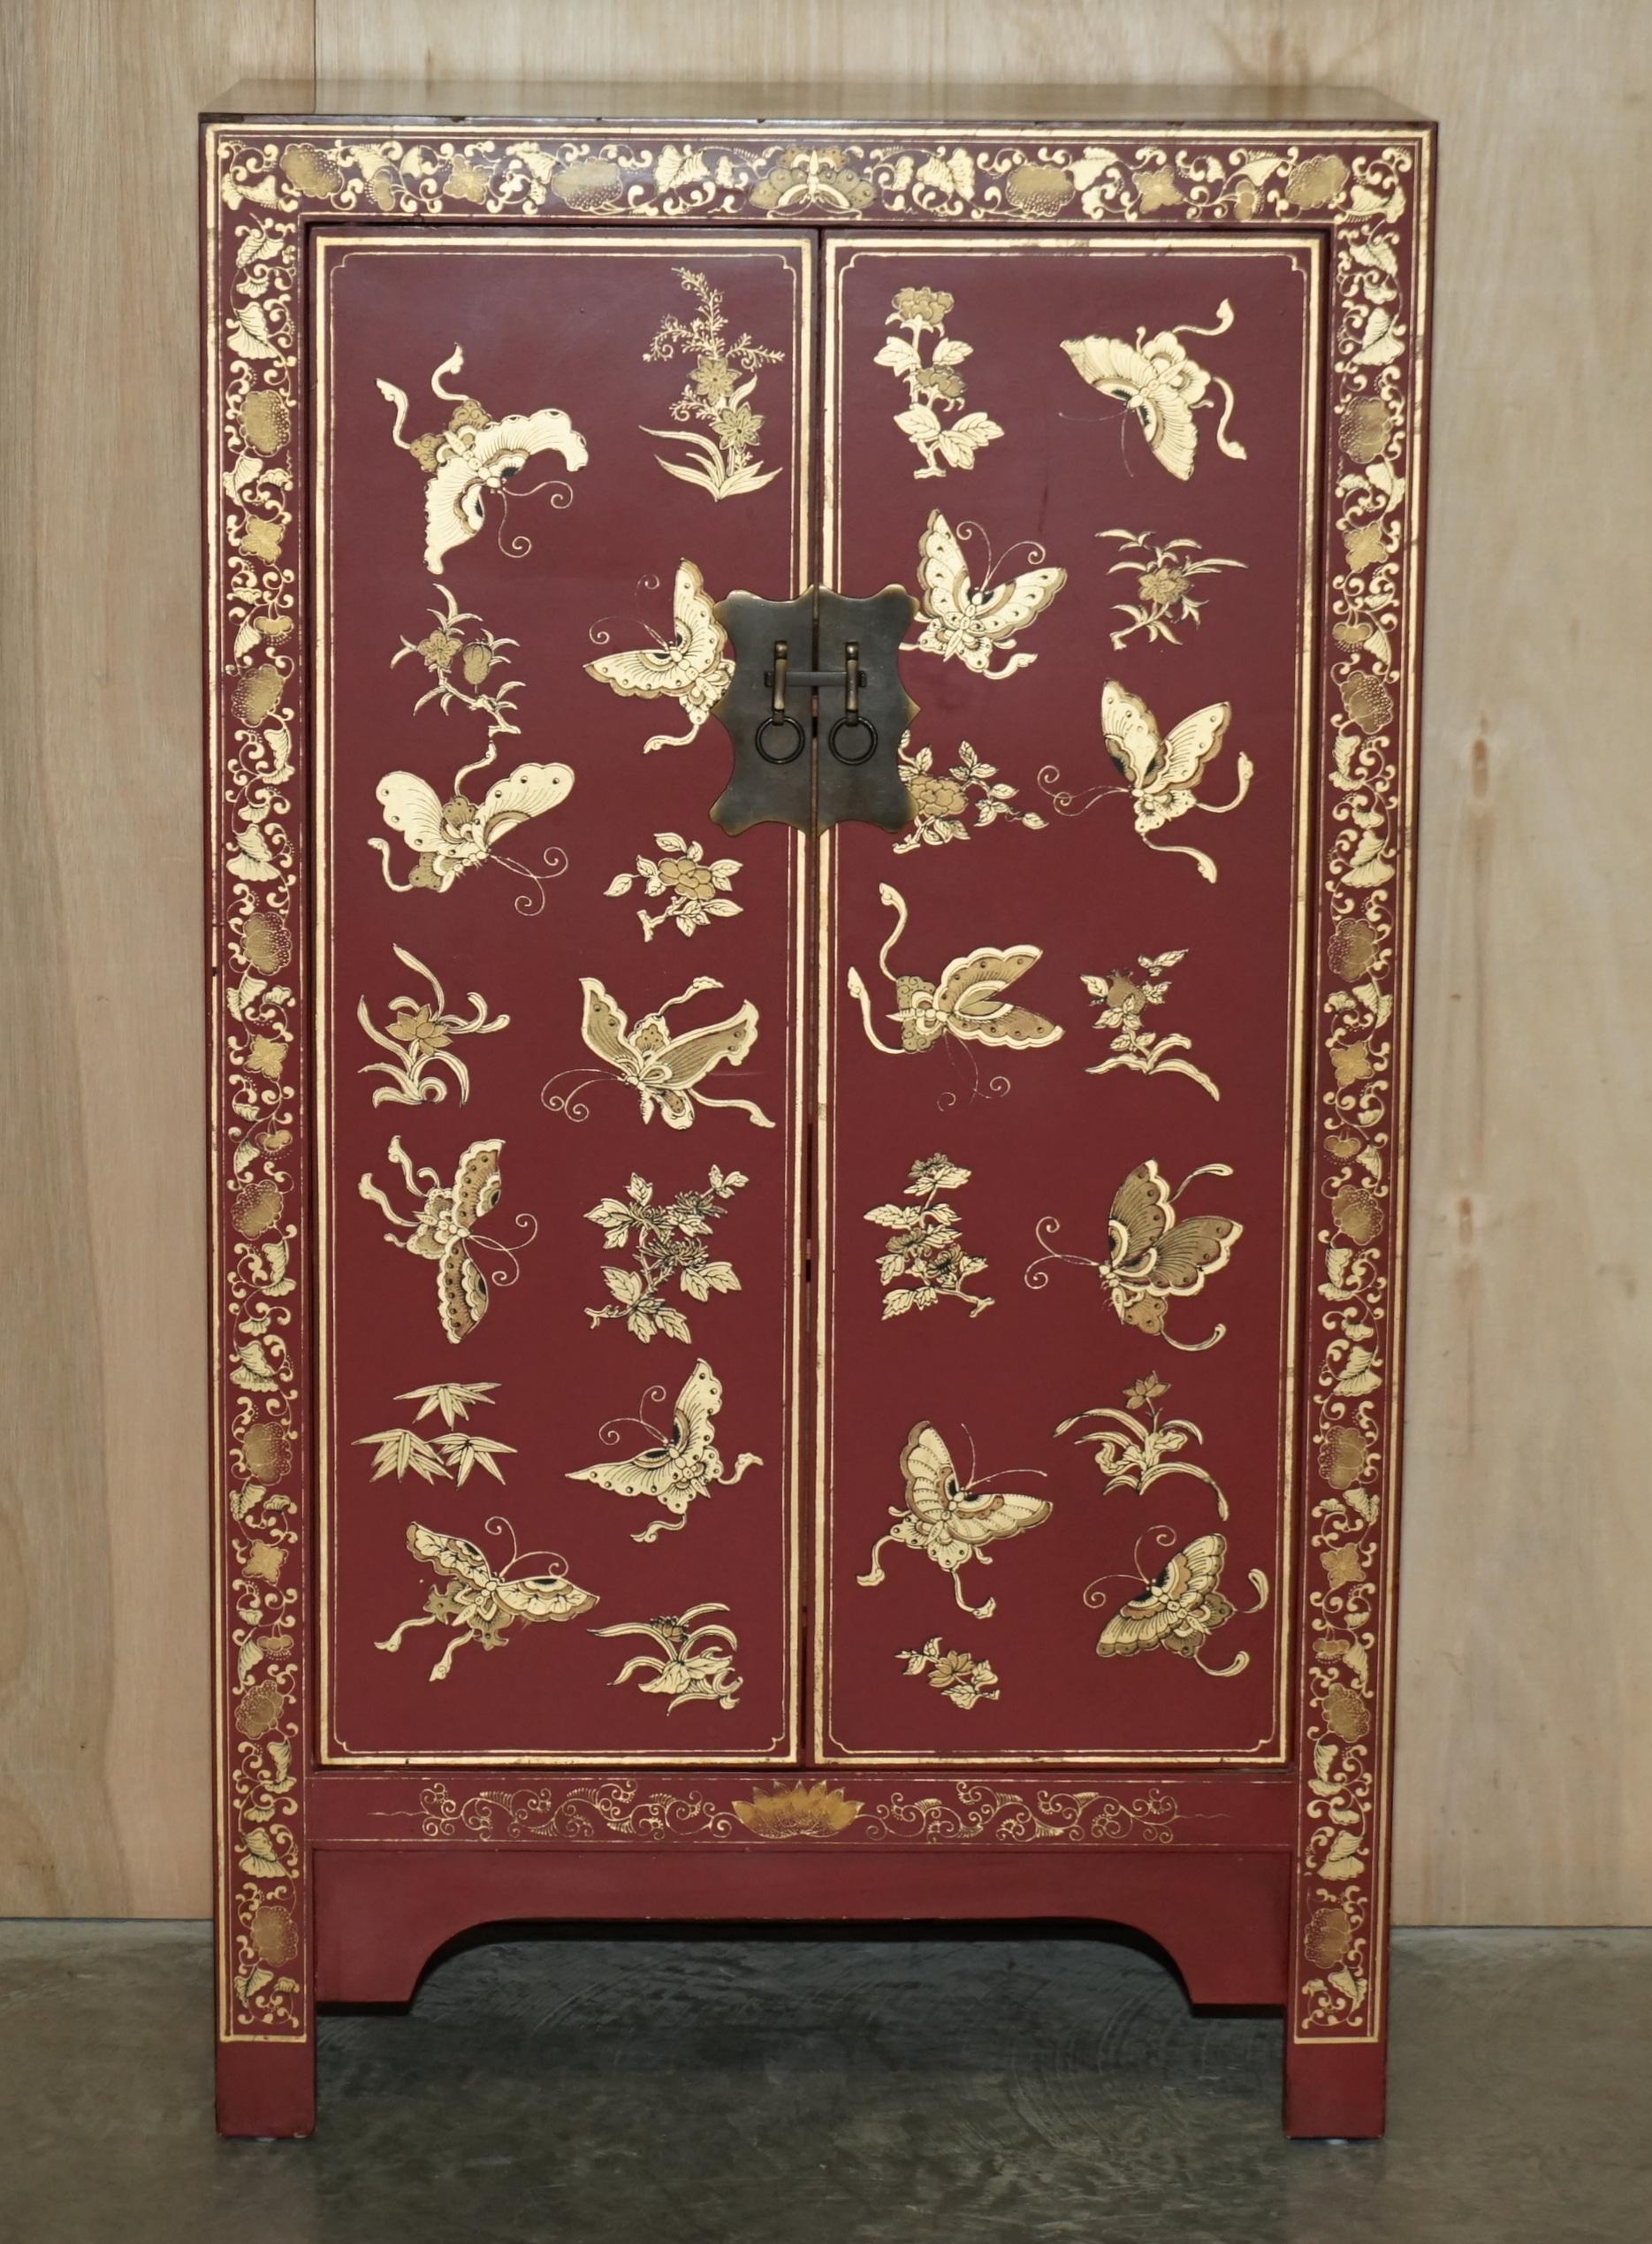 We are delighted to offer for sale this lovely vintage circa 1900's hand painted and lacquered Chinese Wedding cupboard decorated with gold leaf butterfly's to be used for folded linens etc

A very good looking and well made piece, these are now